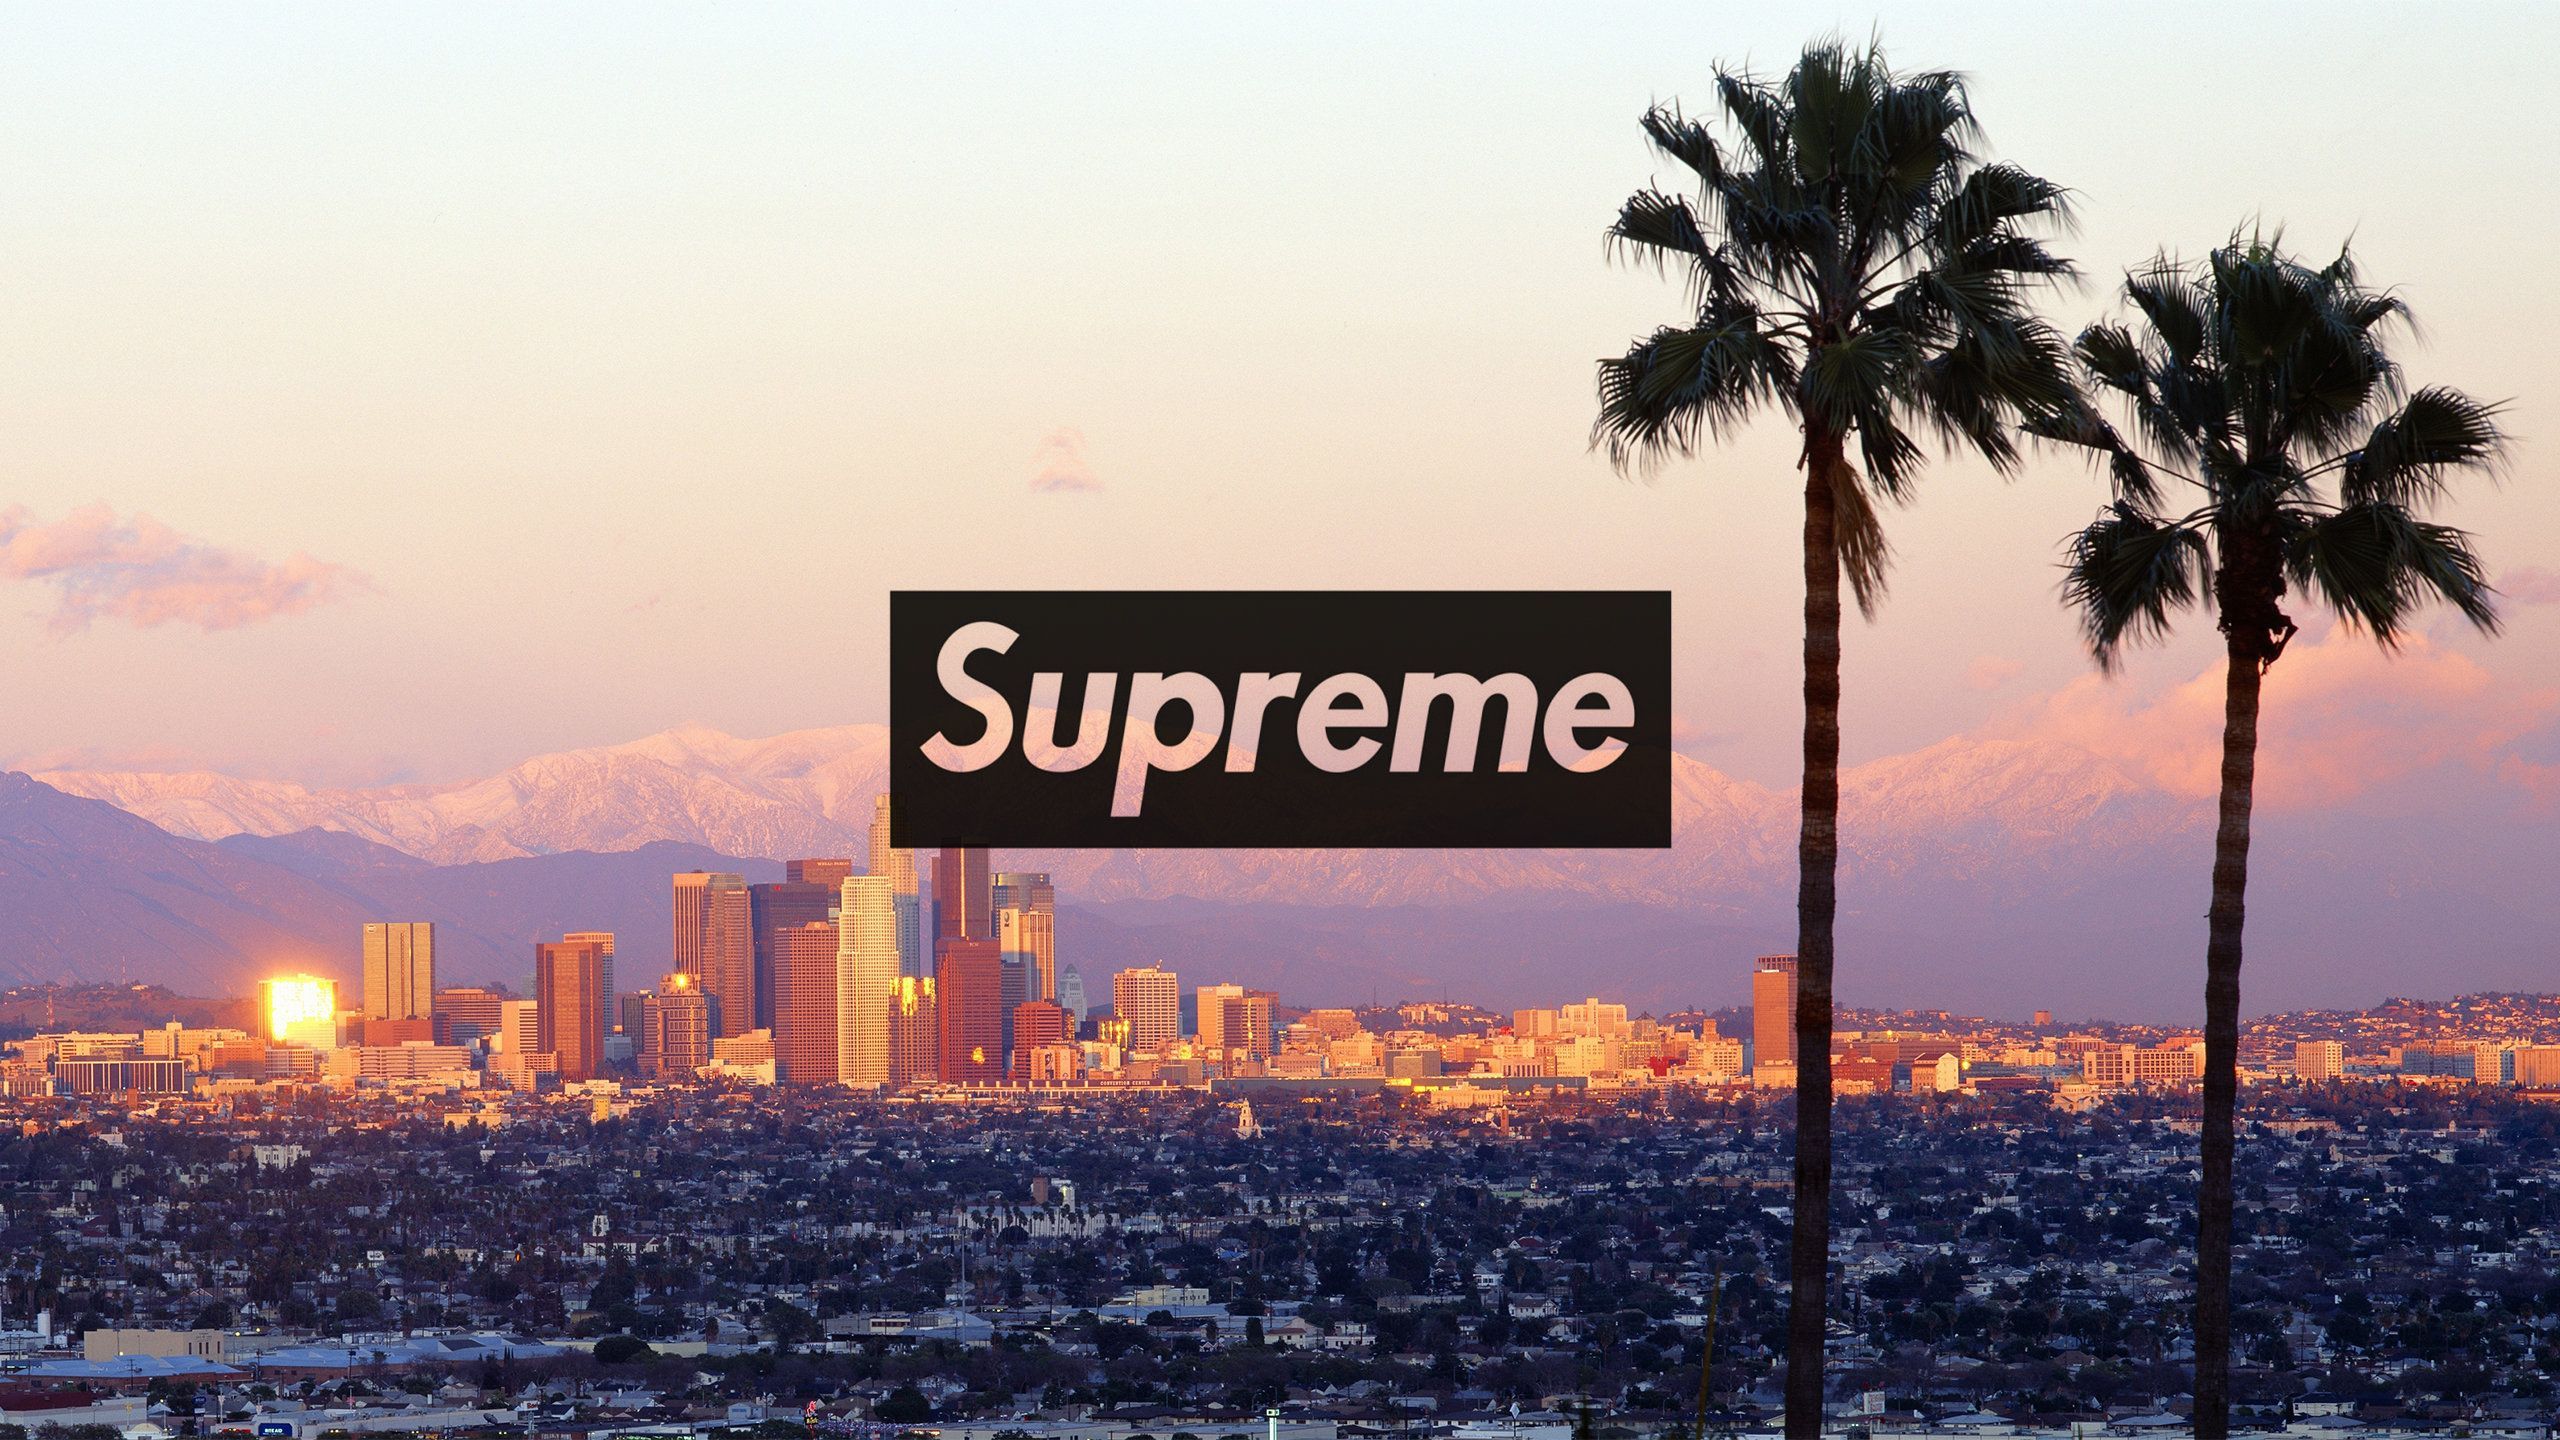 Supreme wallpaper, los angeles skyline, palm trees, mountains, cityscape, city, downtown, sunset, sunset wallpaper, los angeles wallpaper, supreme logo, supreme background, supreme phone wallpaper, supreme phone background, supreme phone screensaver, supreme phone wallpaper, supreme phone background, supreme phone screensaver - Supreme